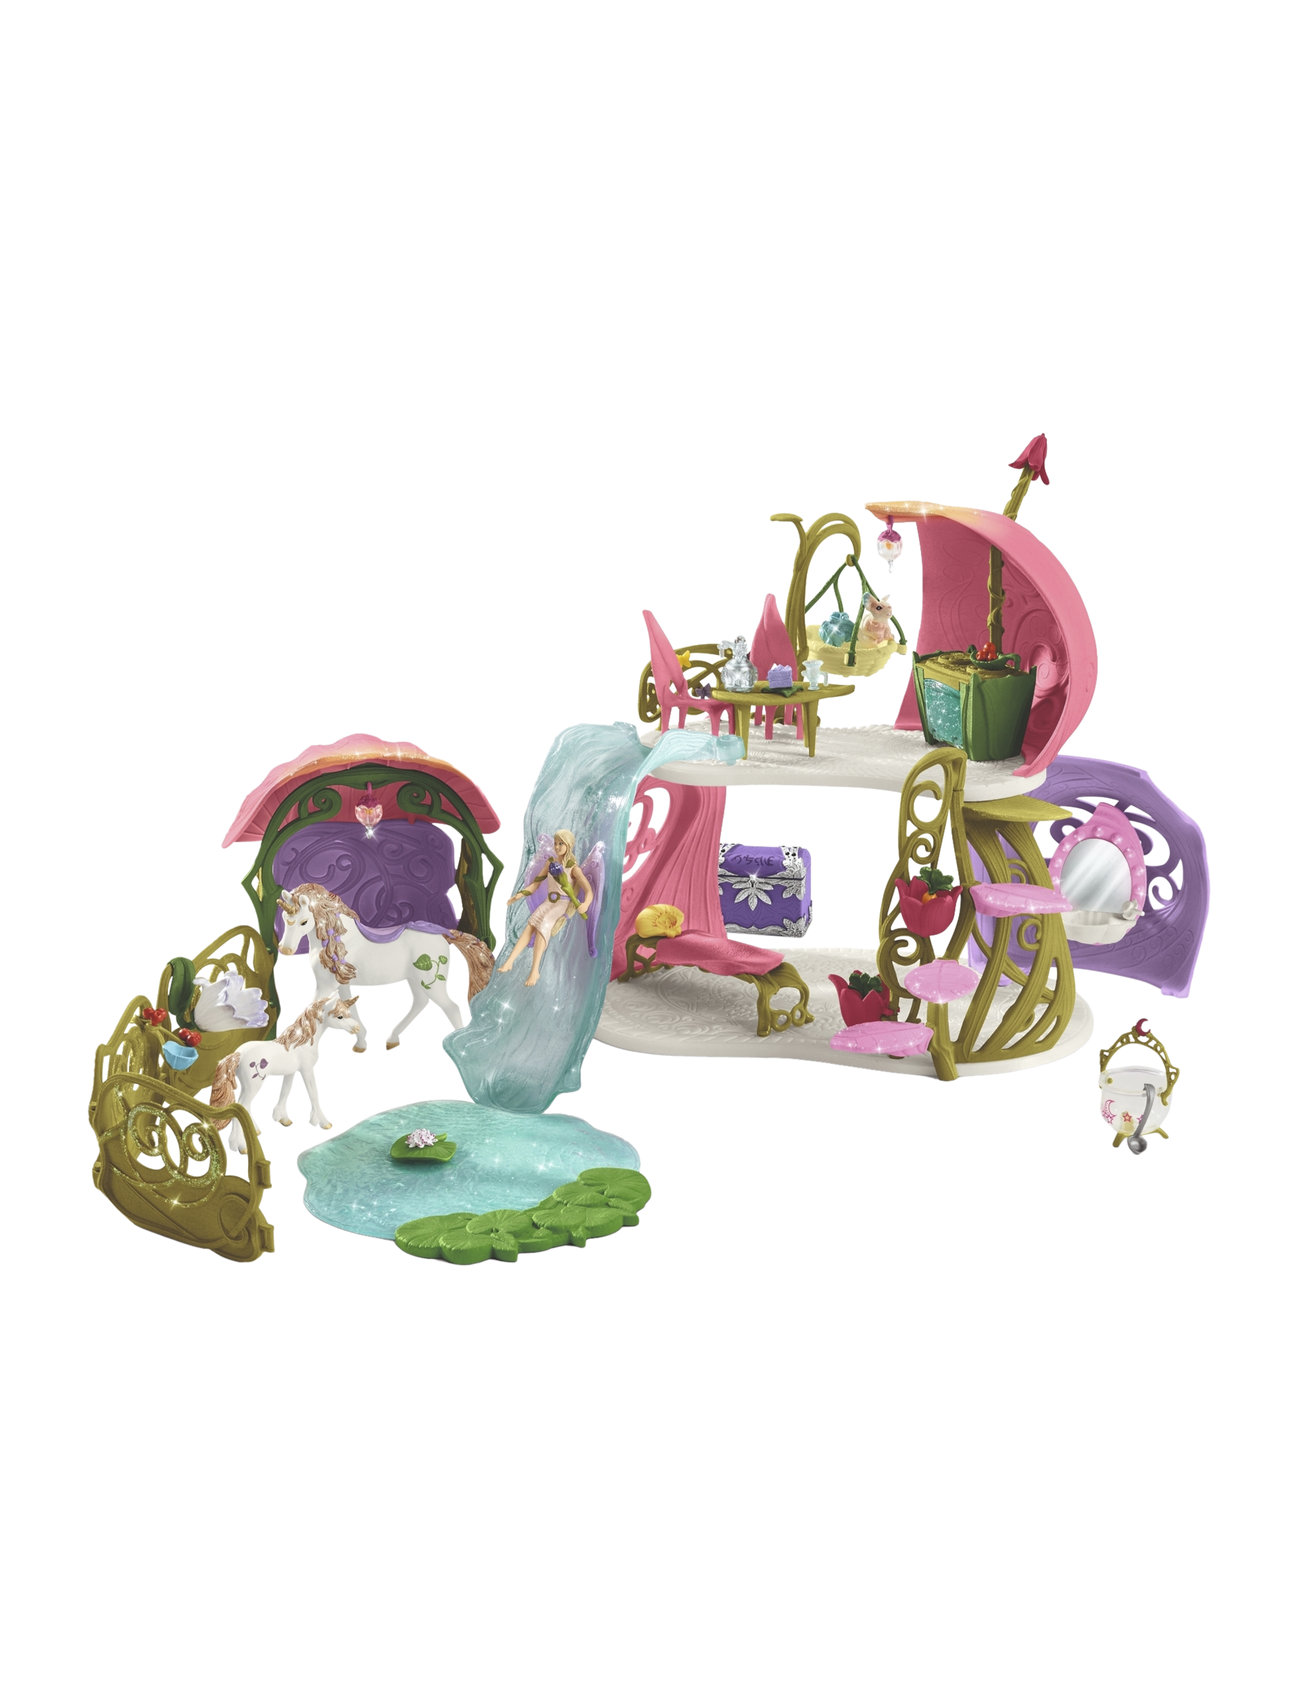 Schleich Glittering Flower House W/ Stable Toys Playsets & Action Figures Play Sets Multi/patterned Schleich